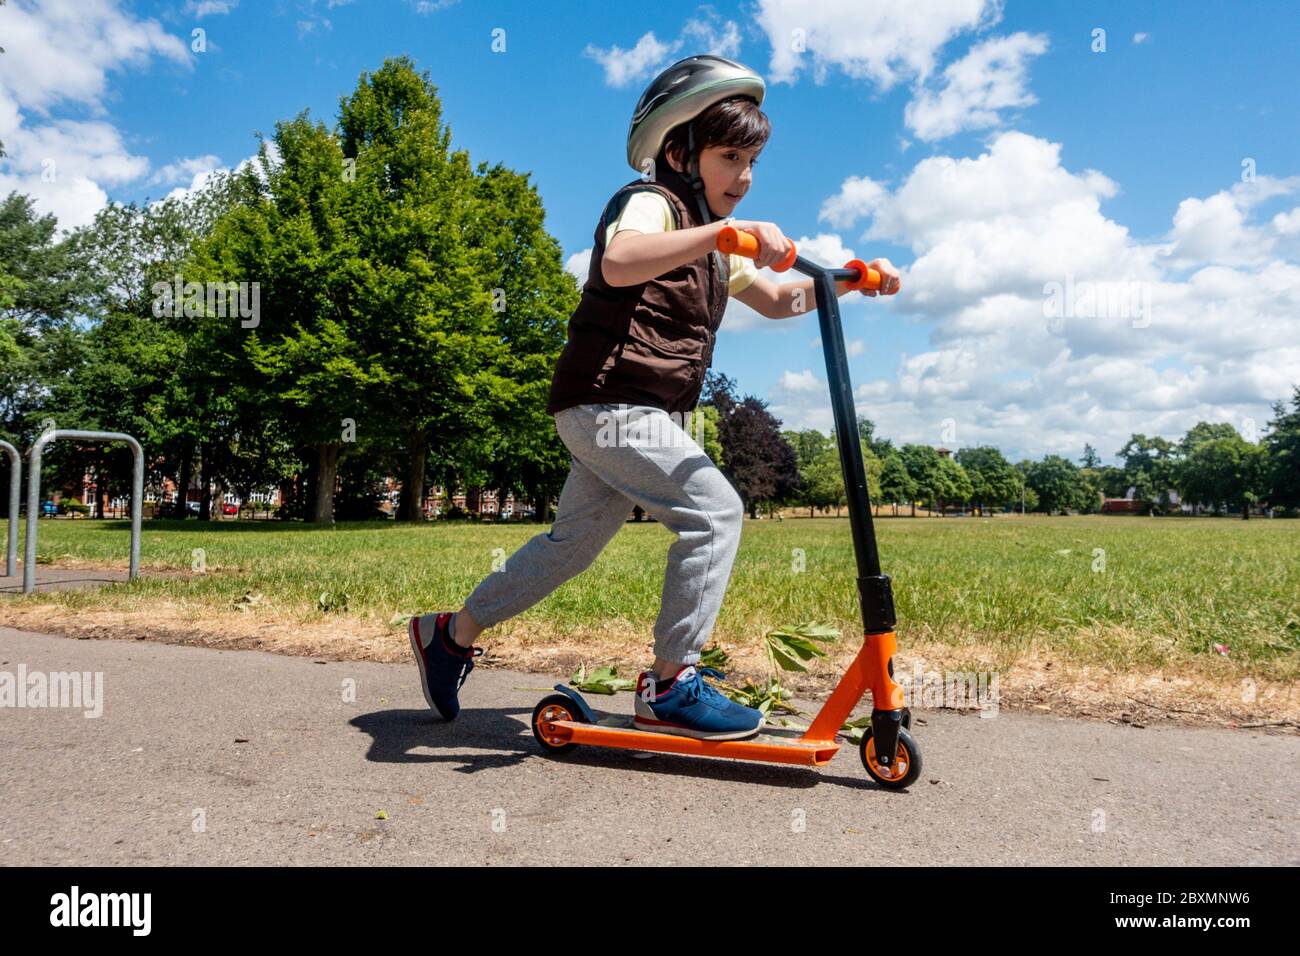 A young boy plays with and pushes his scooter on a sunny day in the park. Blue sky and green trees. Energetic and active child. Stock Photo